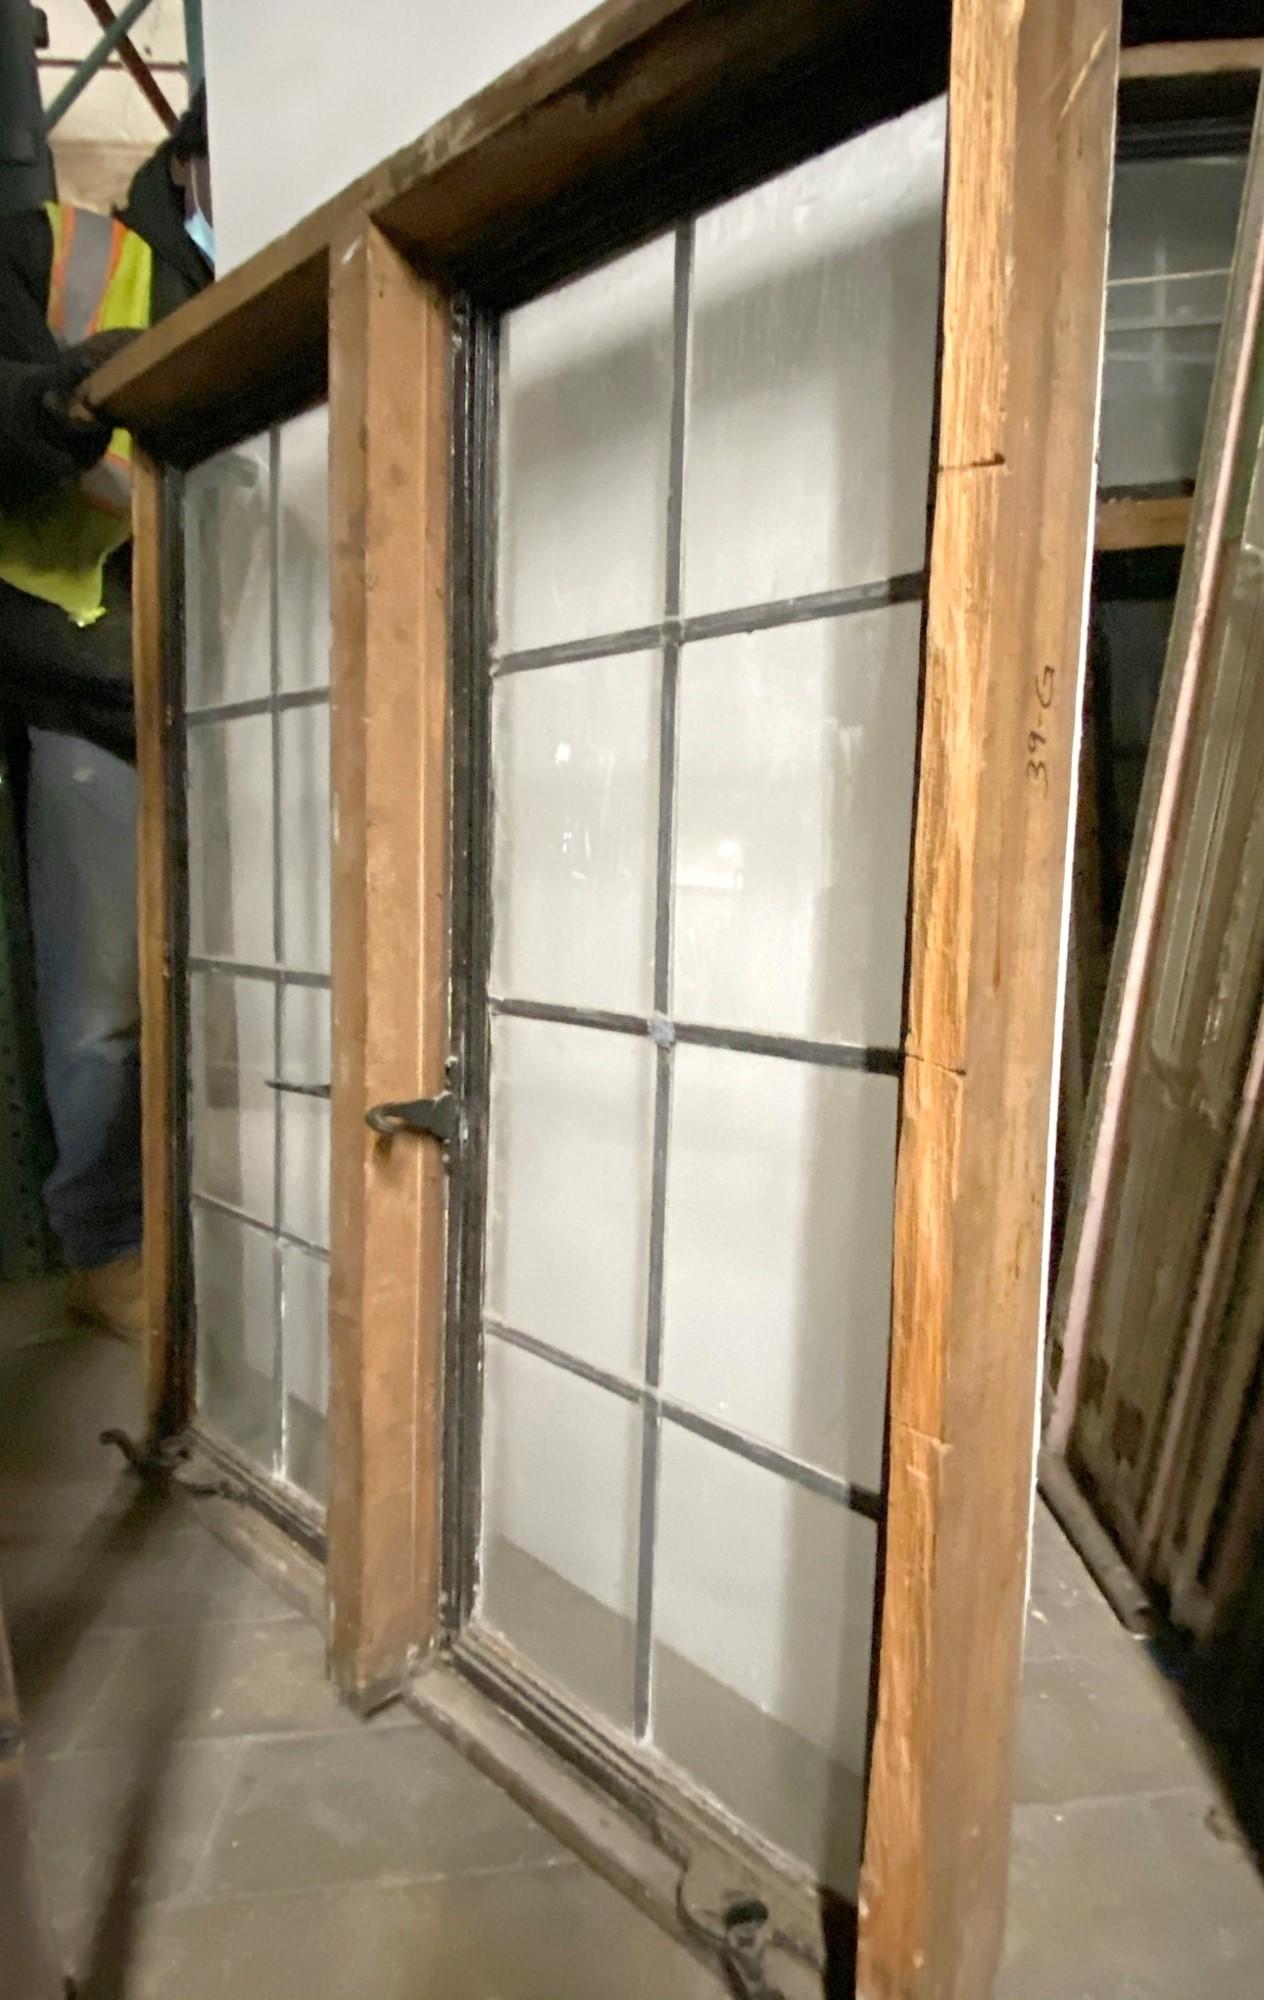 These encasement windows are from a Tudor estate originating from the early 1900's. They have an industrial steel frame with 8 panes of leaded glass on each side with all hardware intact as pictured. The hardware includes original bronze hand cranks